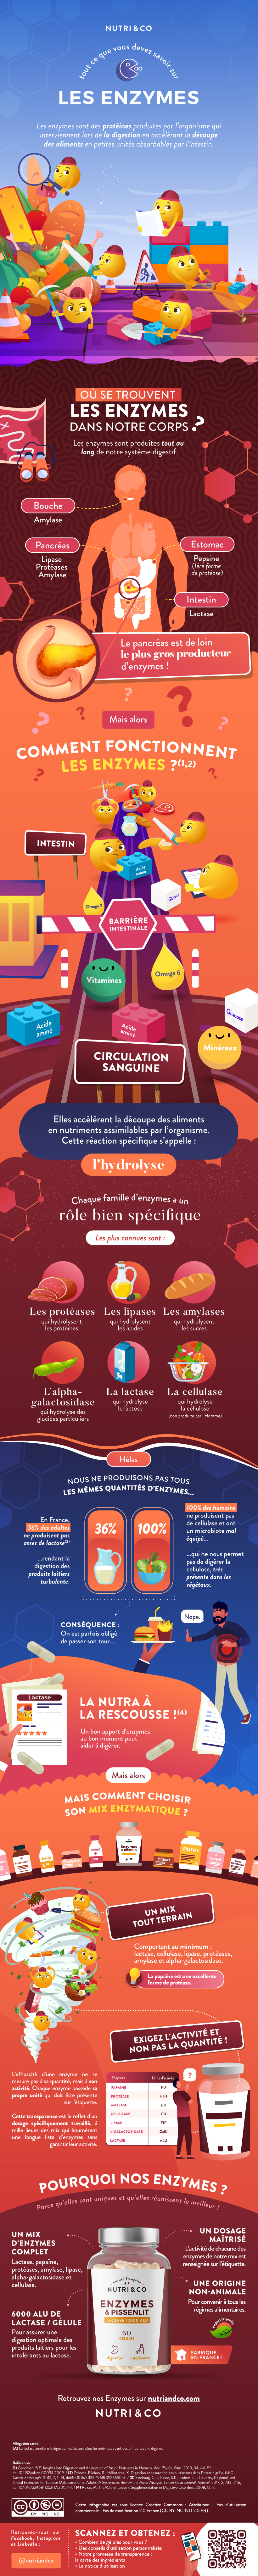 infographie enzymes digestives